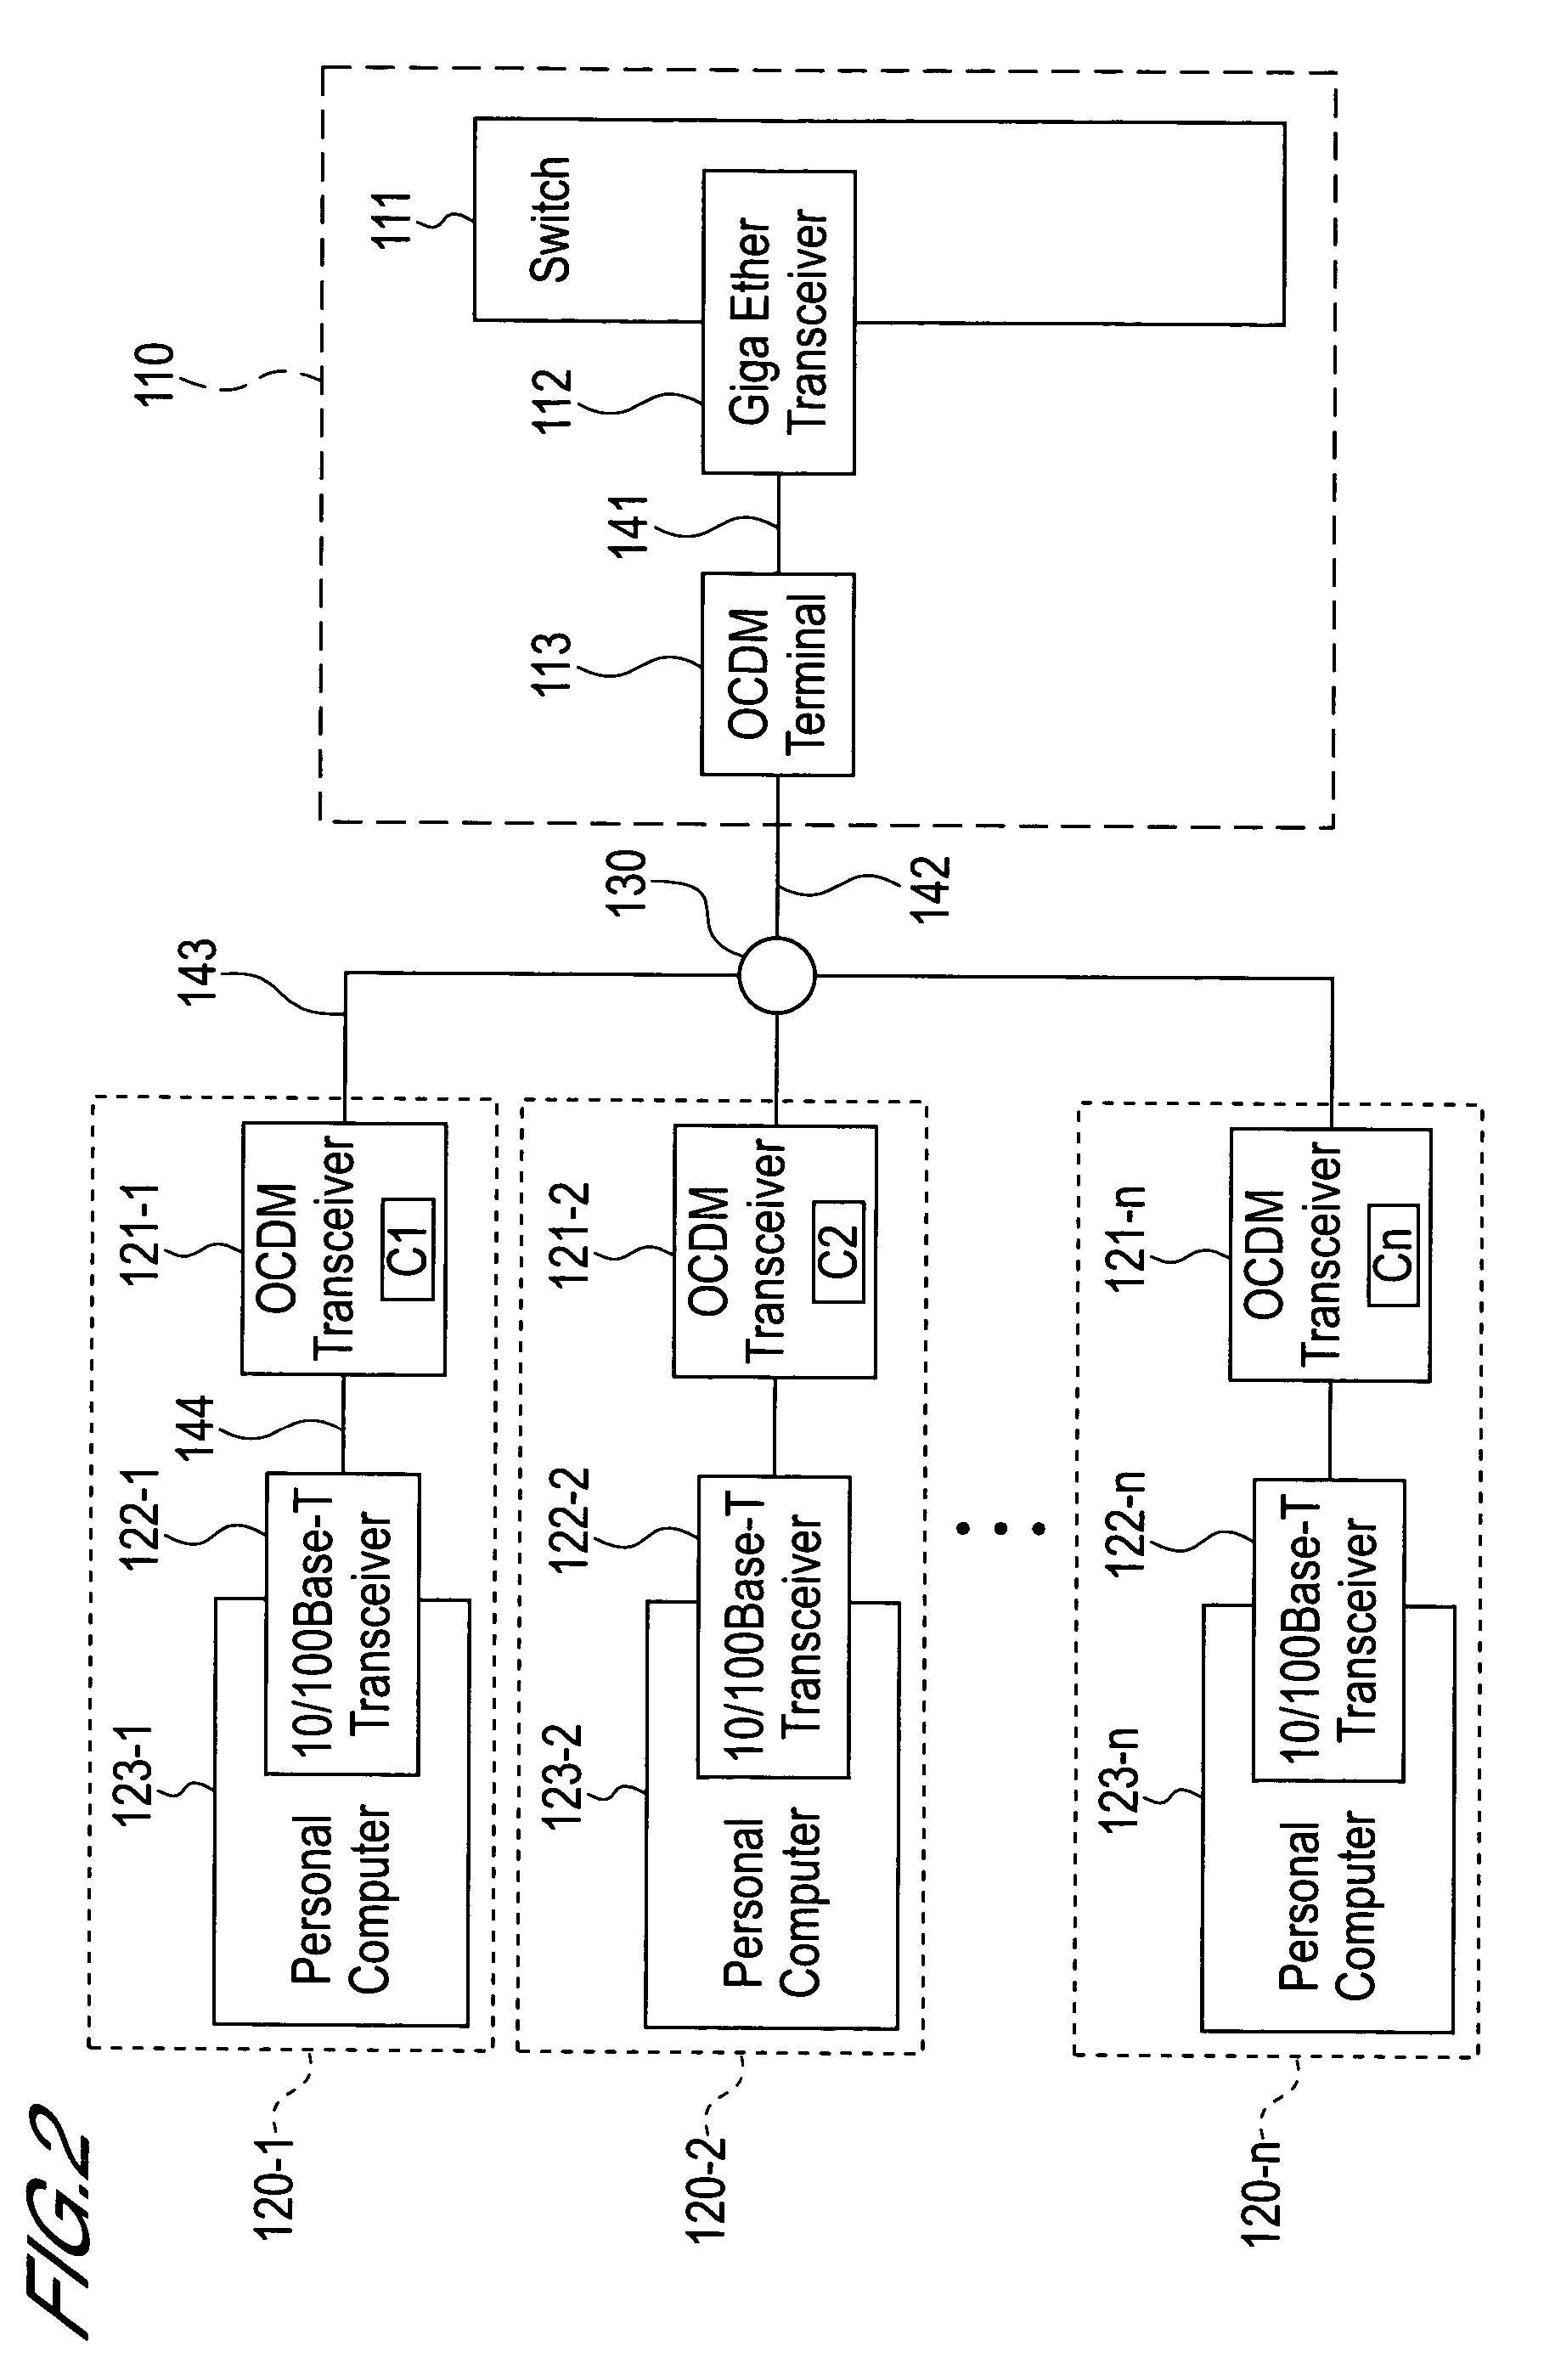 Optical communication network using a code division multiplexing method